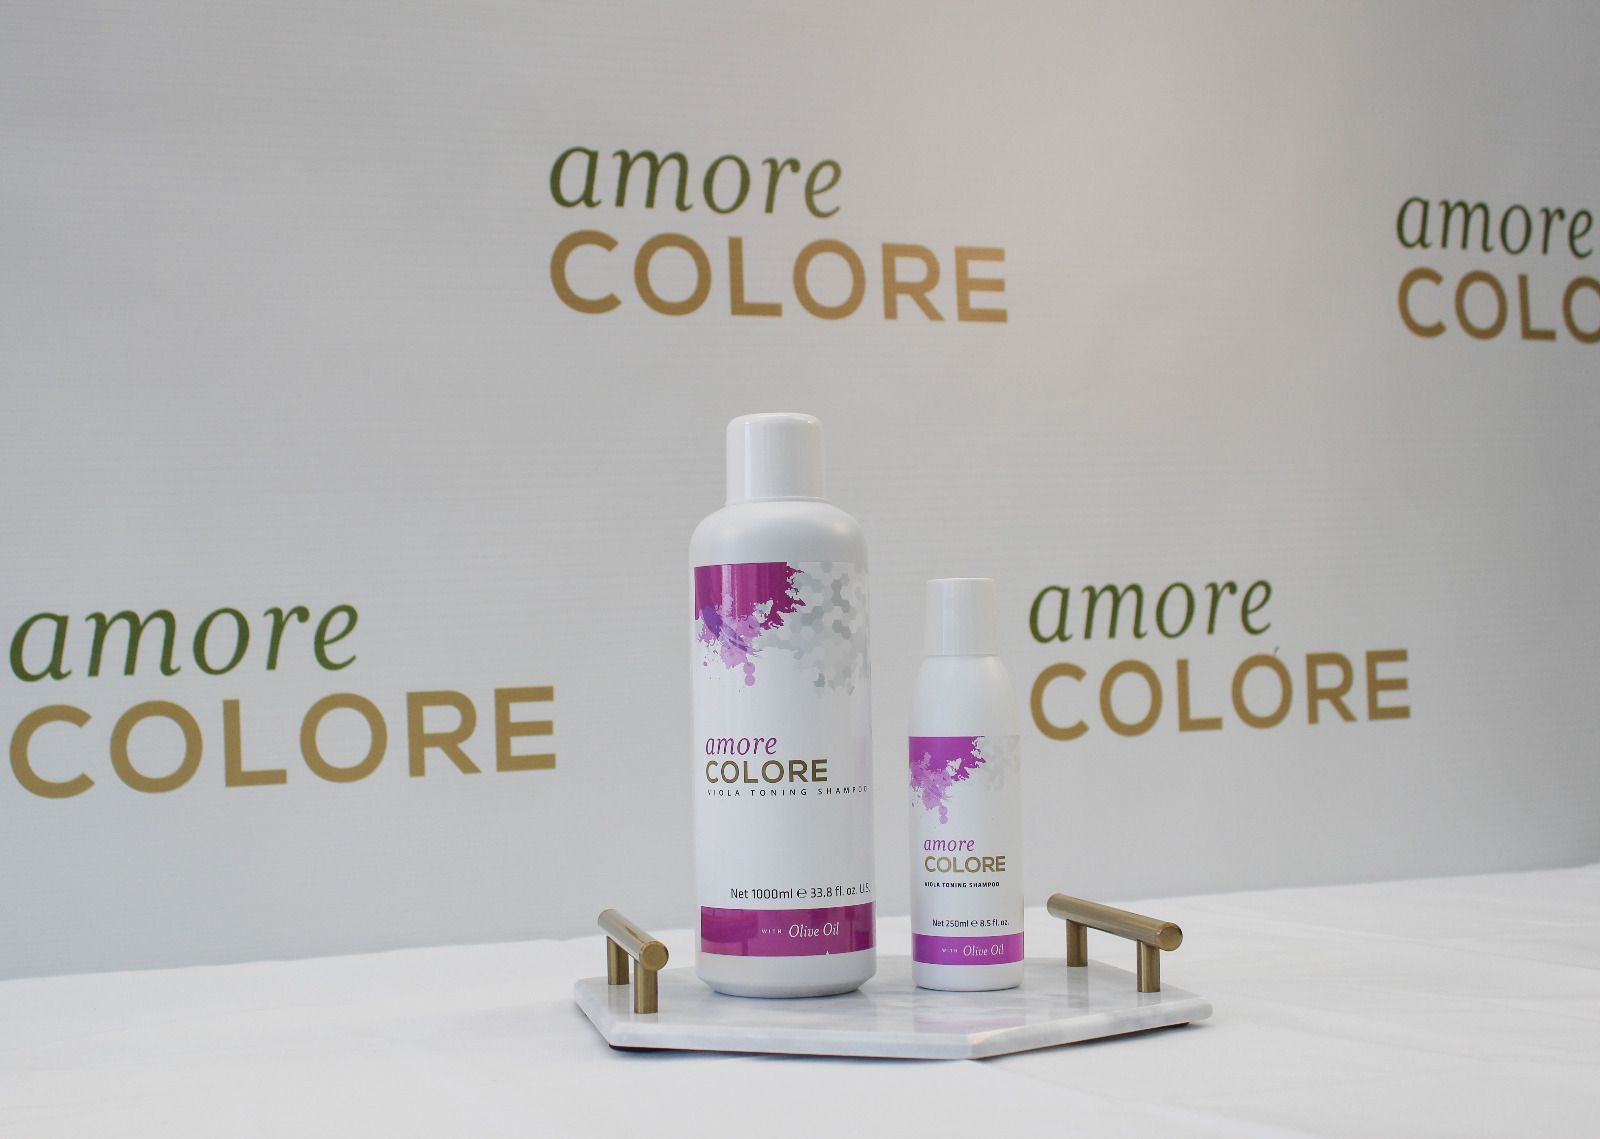 Amore Colore Toning Shampoo and Conditioner